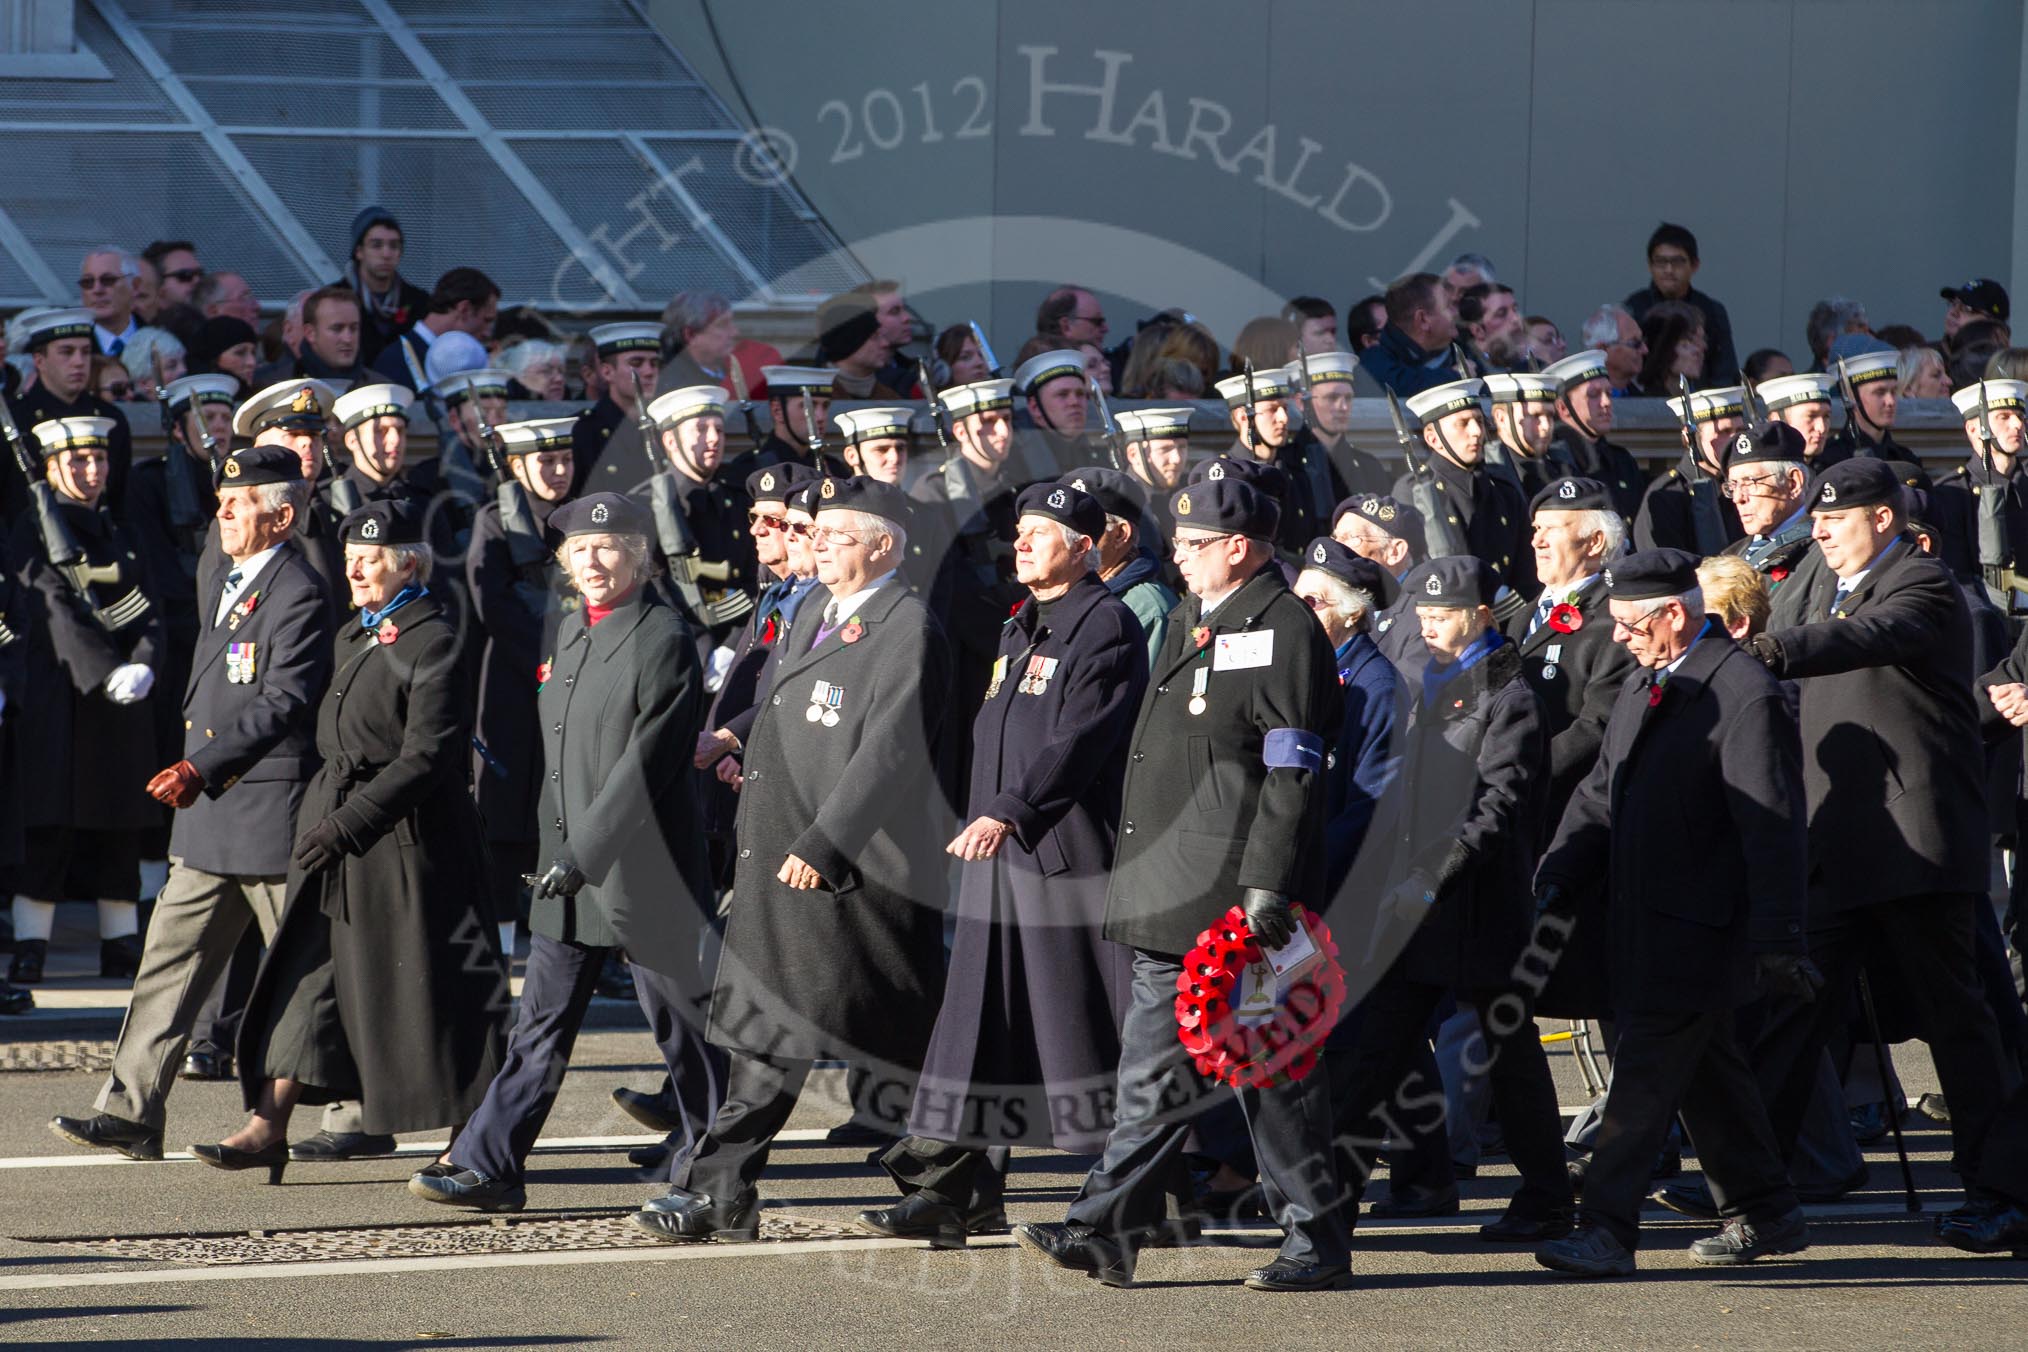 Remembrance Sunday 2012 Cenotaph March Past: Group C15 - Royal Observer Corps Association..
Whitehall, Cenotaph,
London SW1,

United Kingdom,
on 11 November 2012 at 12:03, image #1147